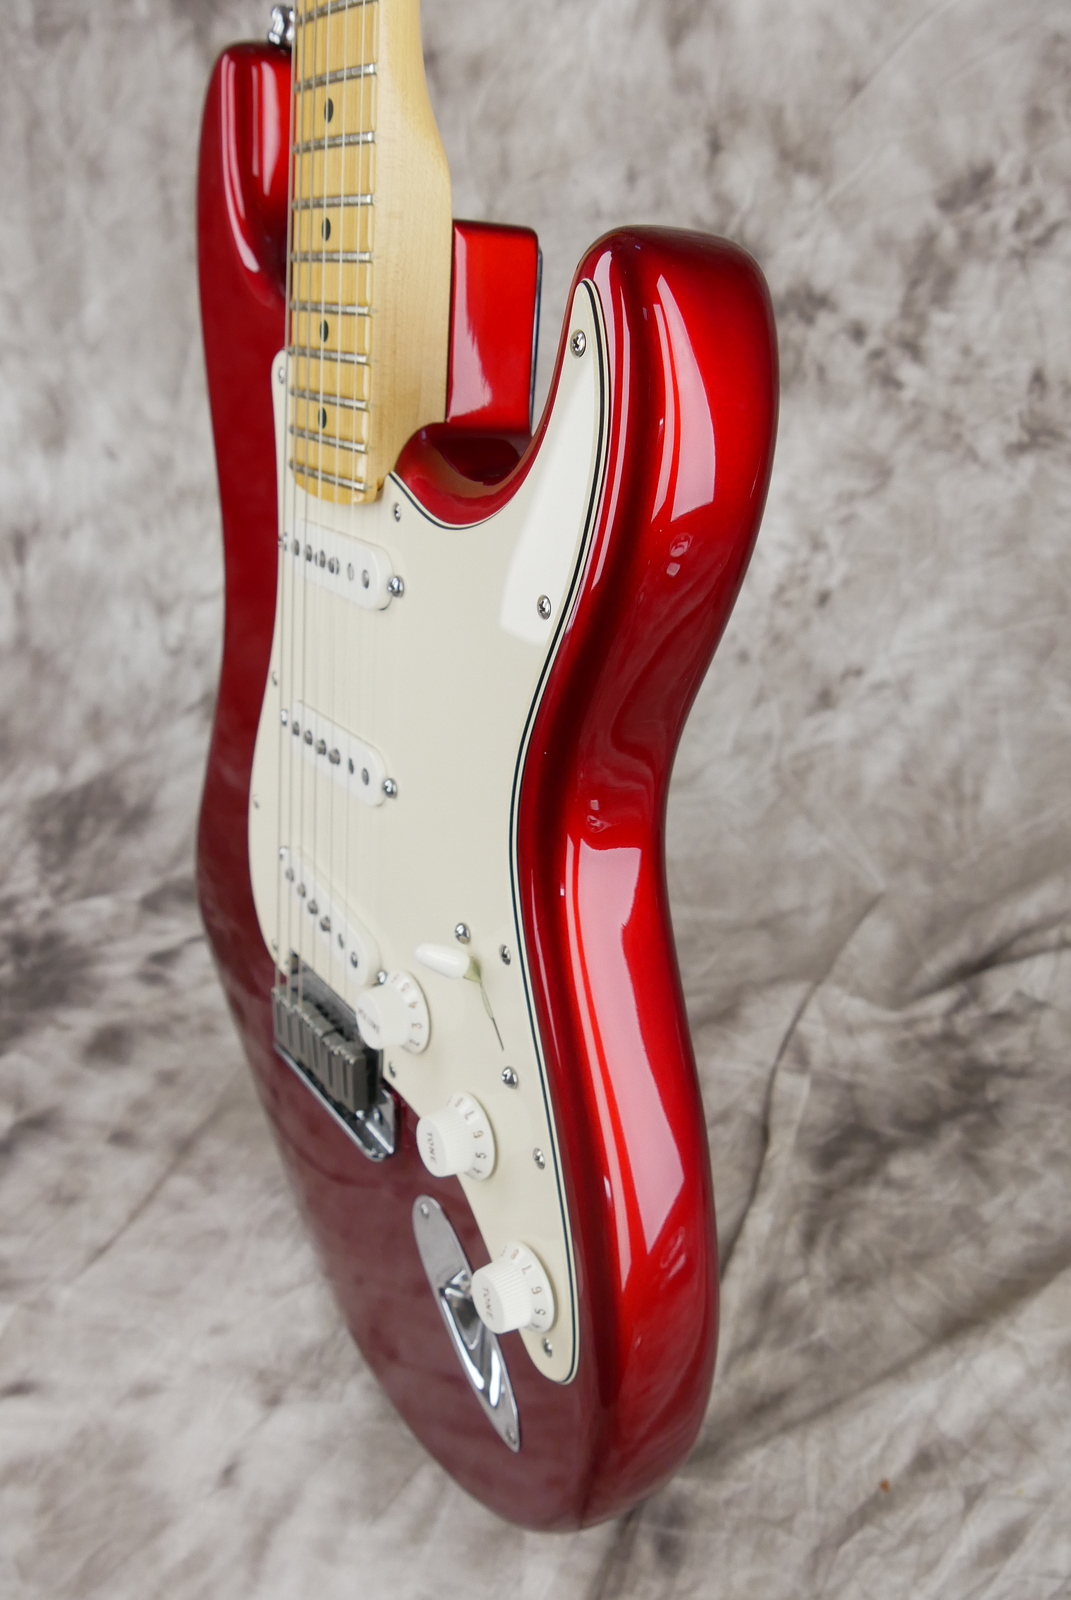 Fender_Stratocaster_USA_built_from_parts_candy_apple_red_2015-006.JPG